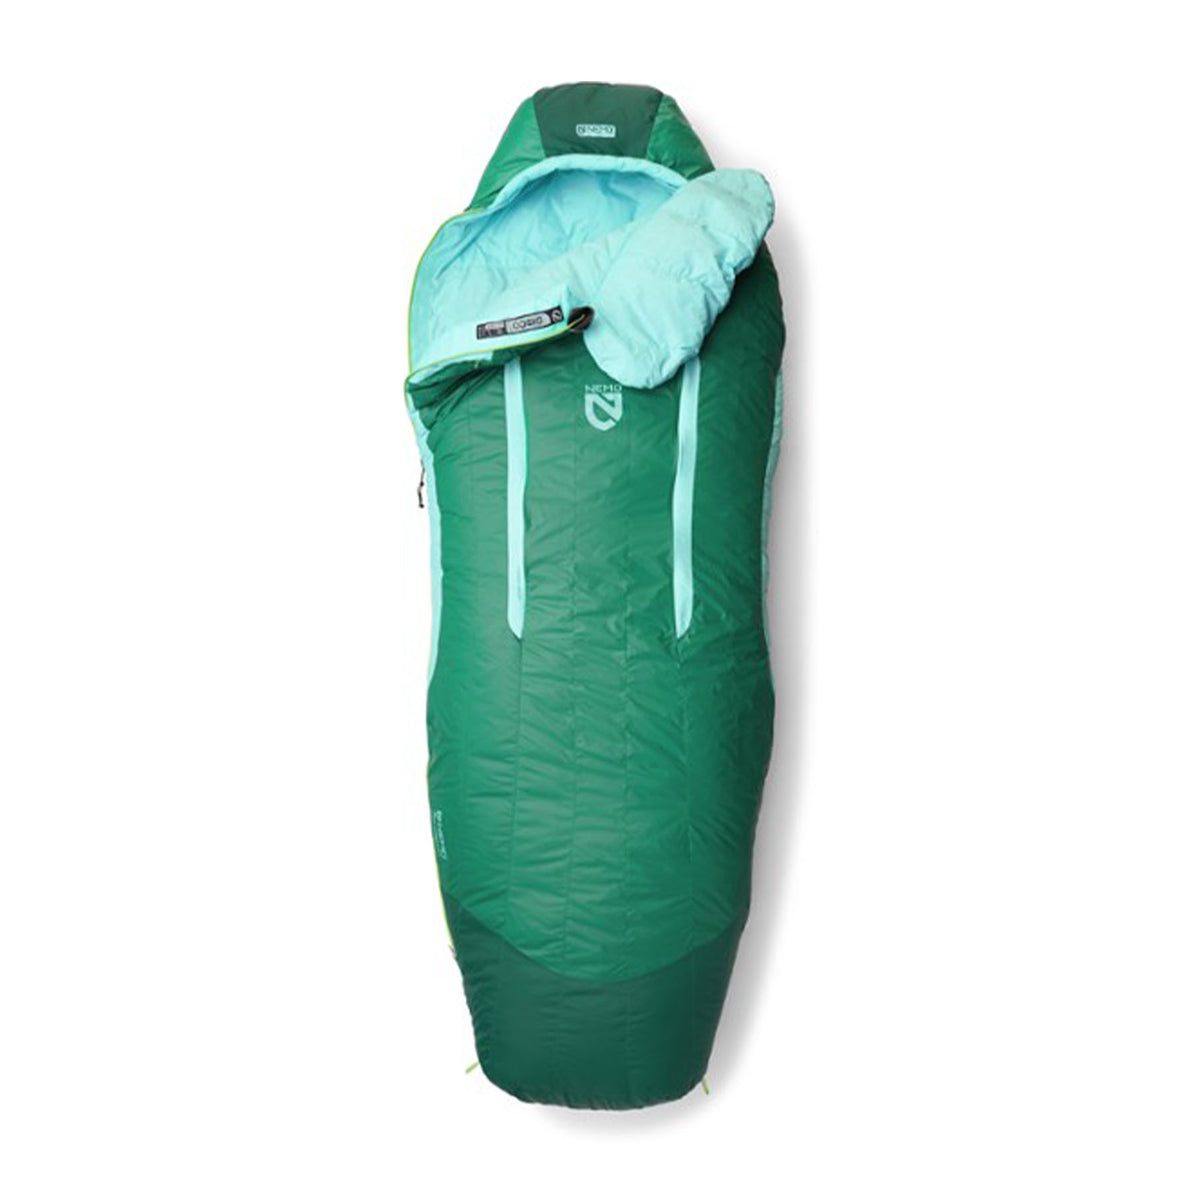 Hero image featuring a top down view of 3/4 zipped Nemo Women's Disco 30 degree sleeping bag in celestial moonglade.